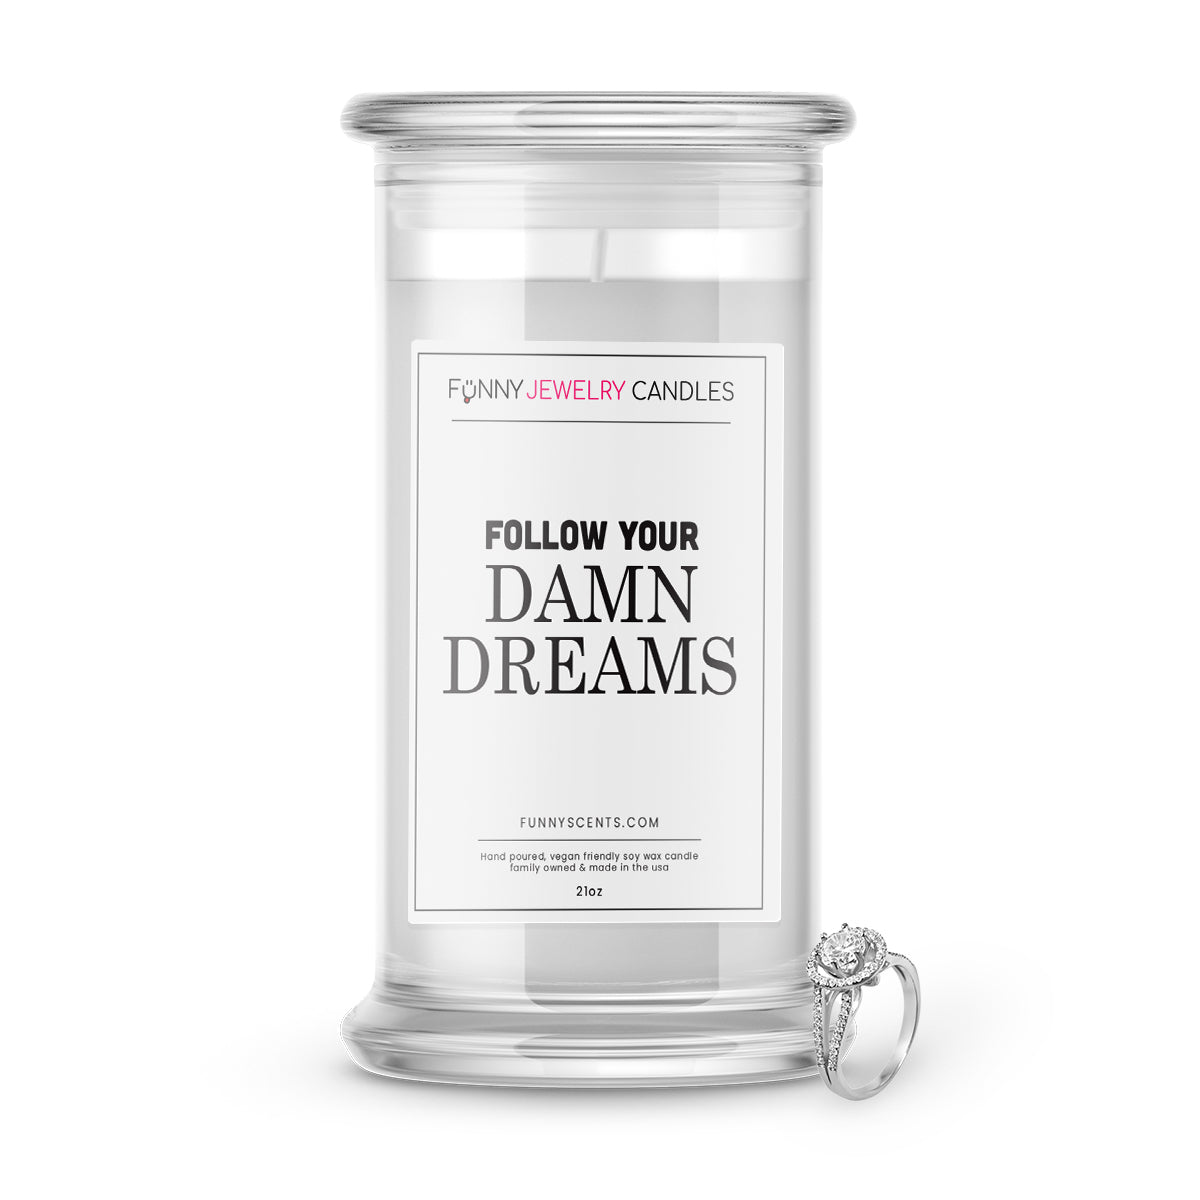 Follow Your Damn Dreams Jewelry Funny Candles